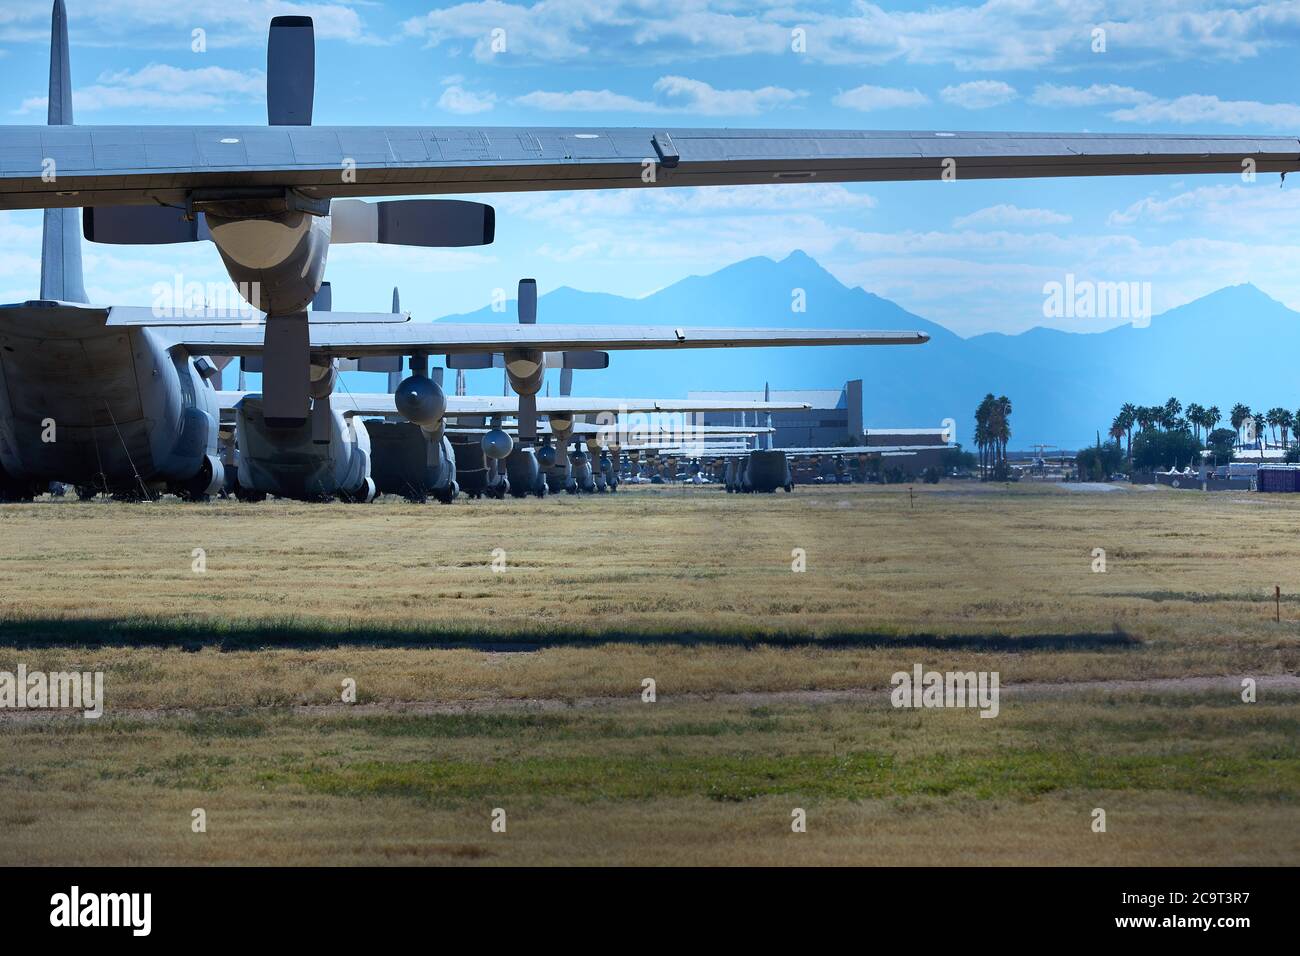 Lines Of C-130s In Deep Storage At The Davis-Monthan Air Base, Tucson, Arizona, USA. Stock Photo